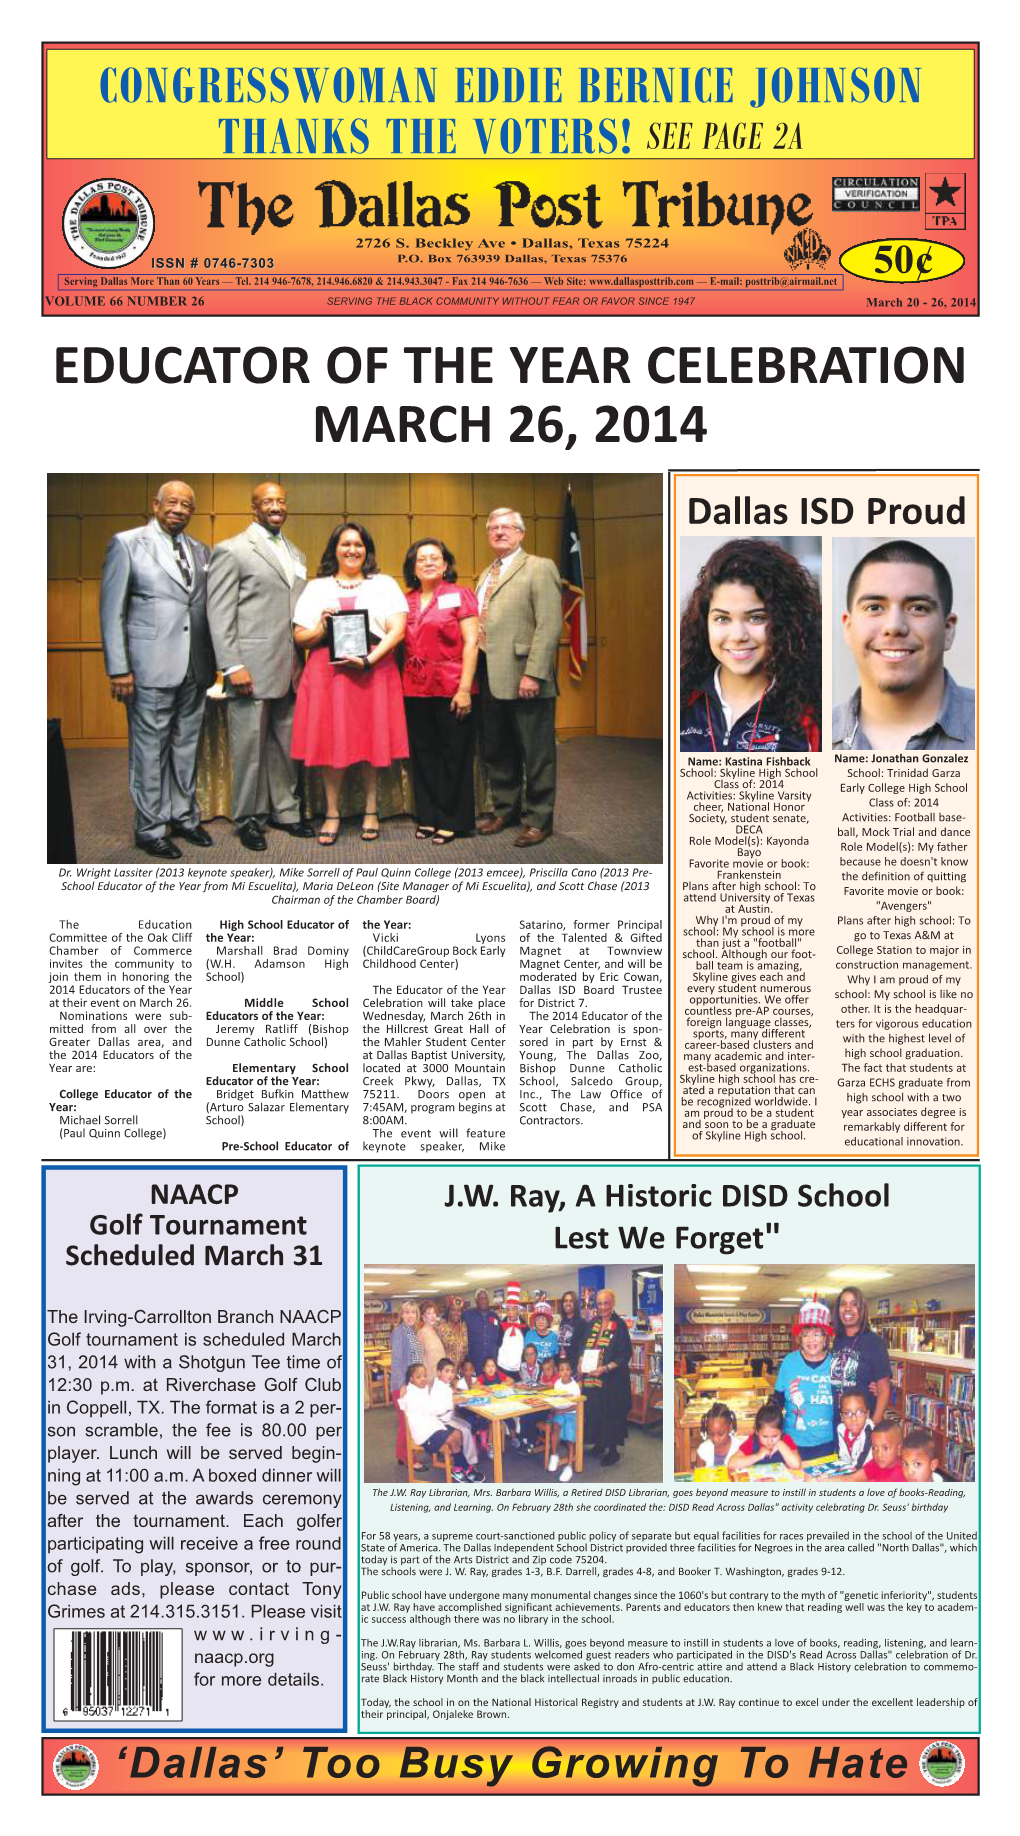 EDUCATOR of the YEAR CELEBRATION MARCH 26, 2014 Dallas ISD Proud